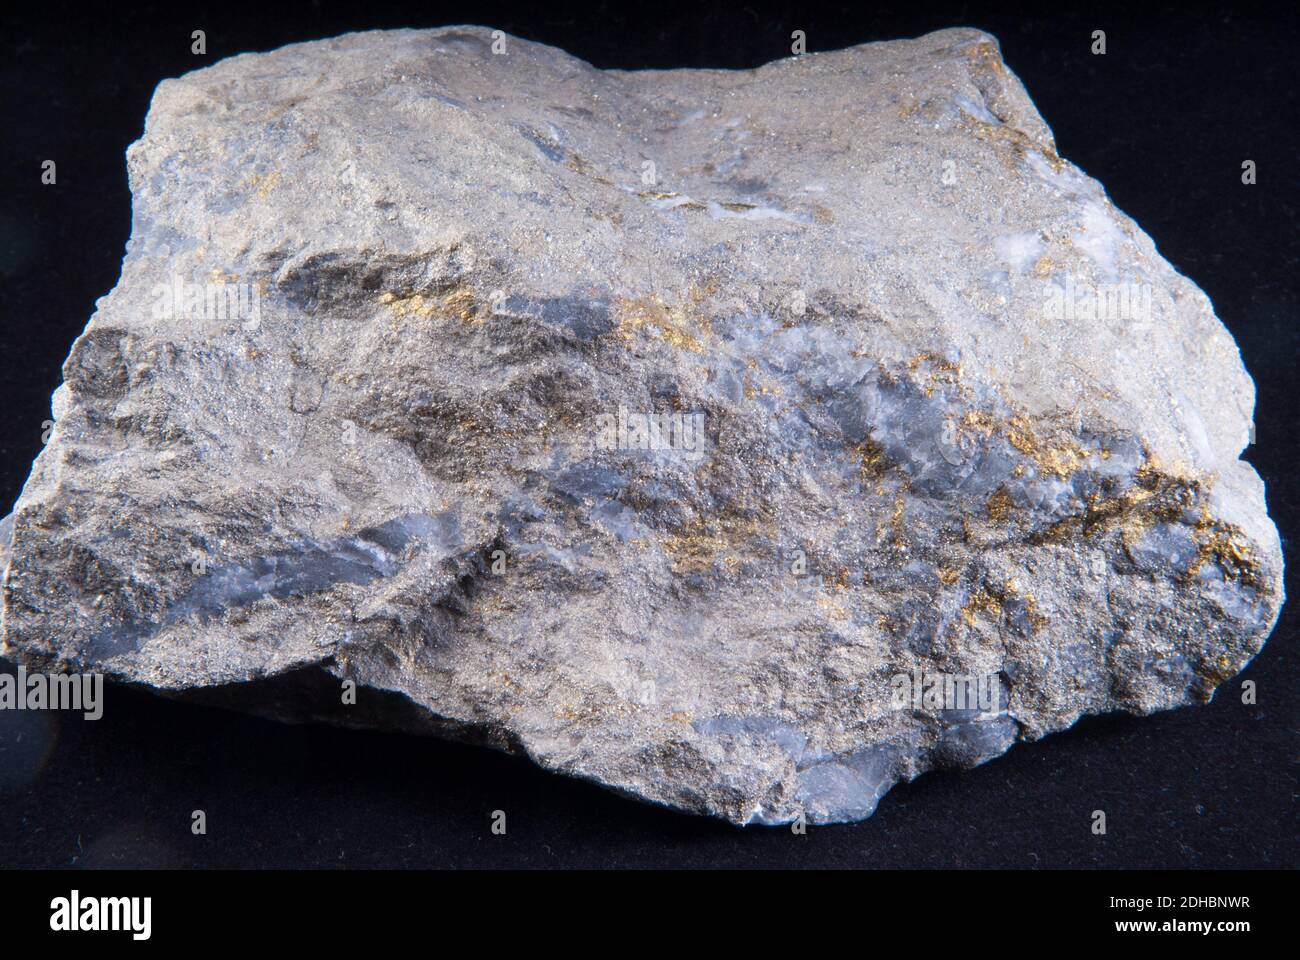 ore sample of silver, copper and gold on a black background Stock Photo